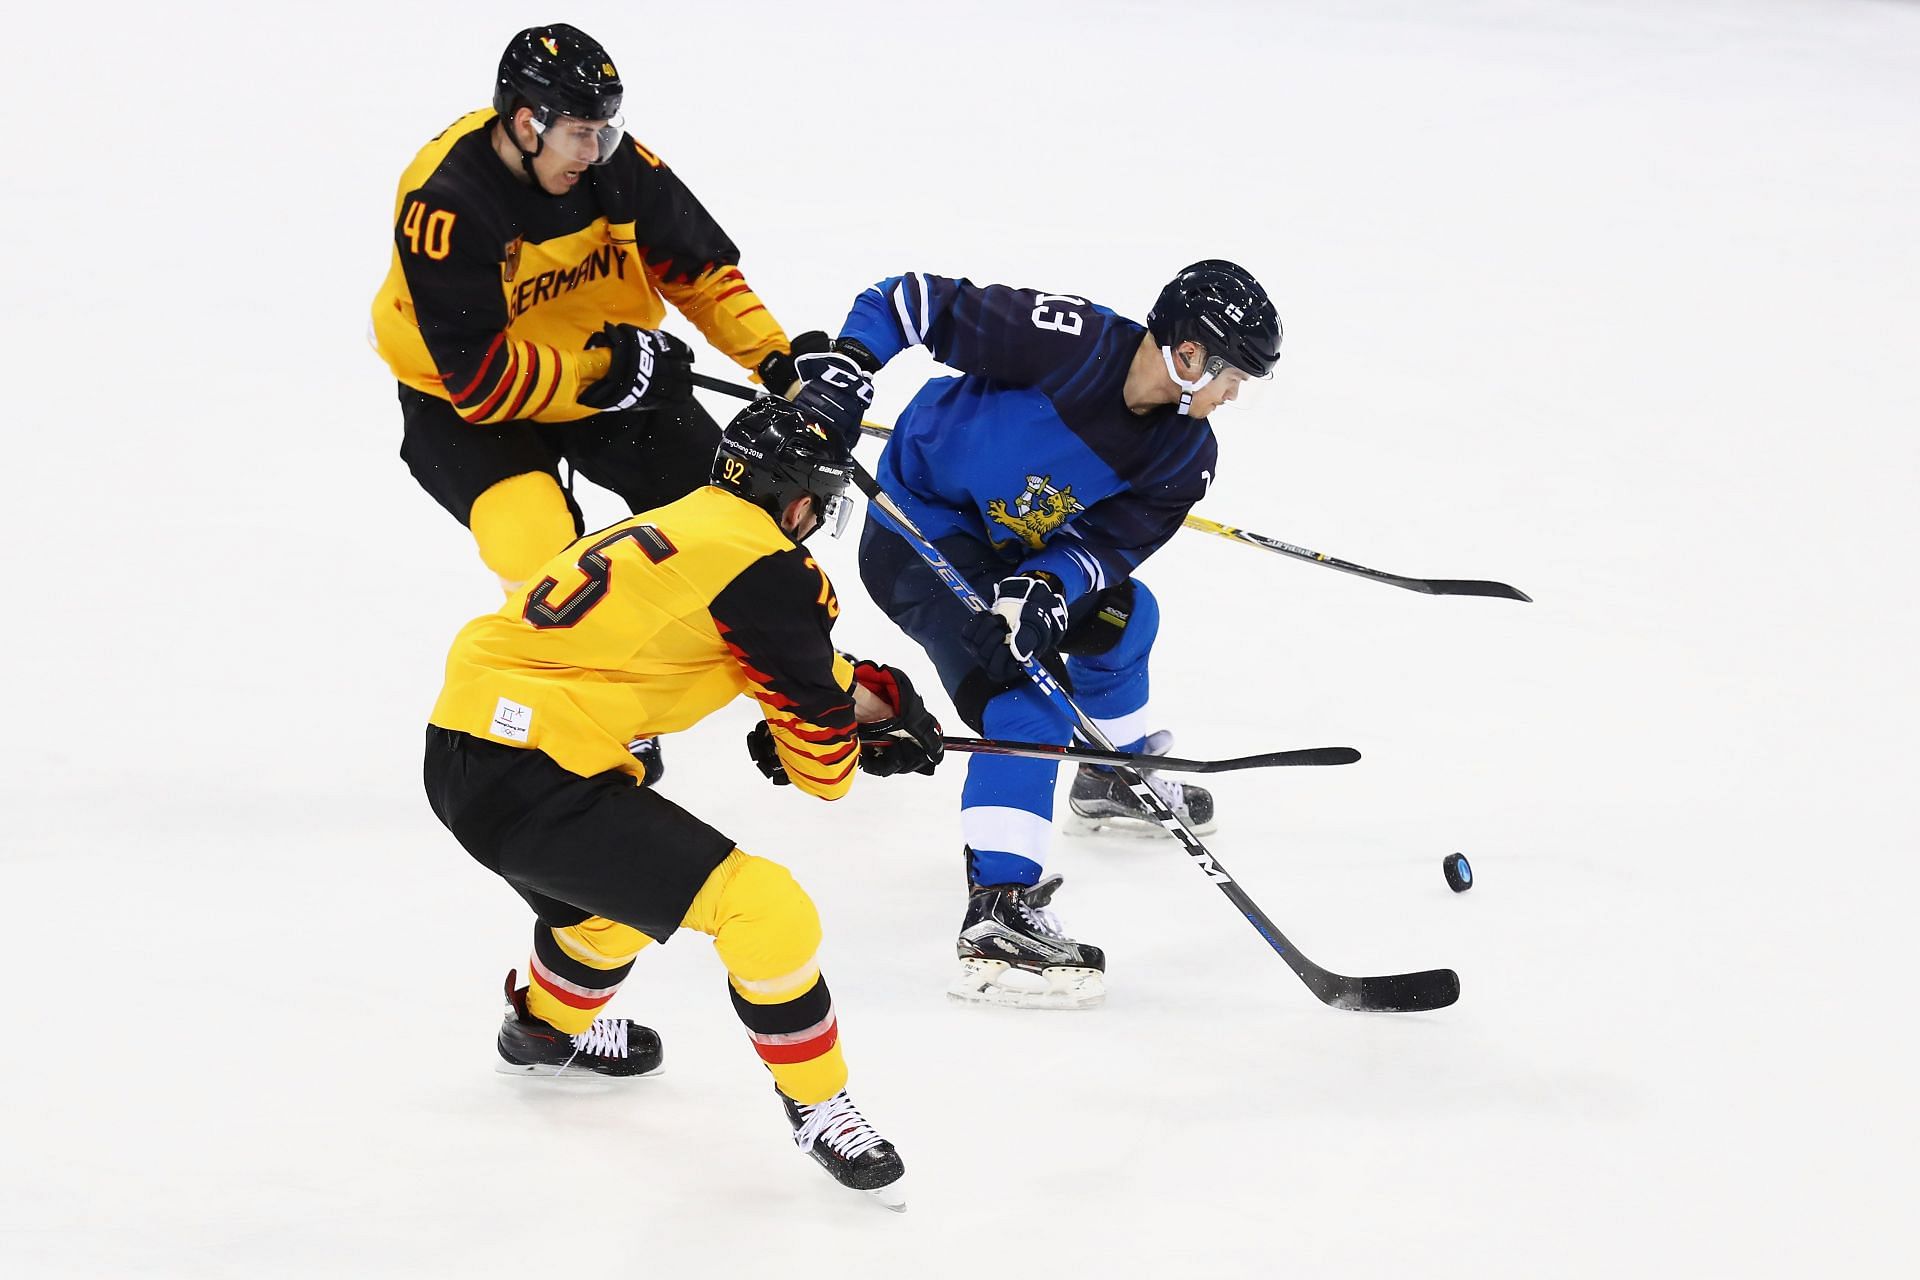 Germany vs Finland Group A How to watch, live streaming, channel list and more